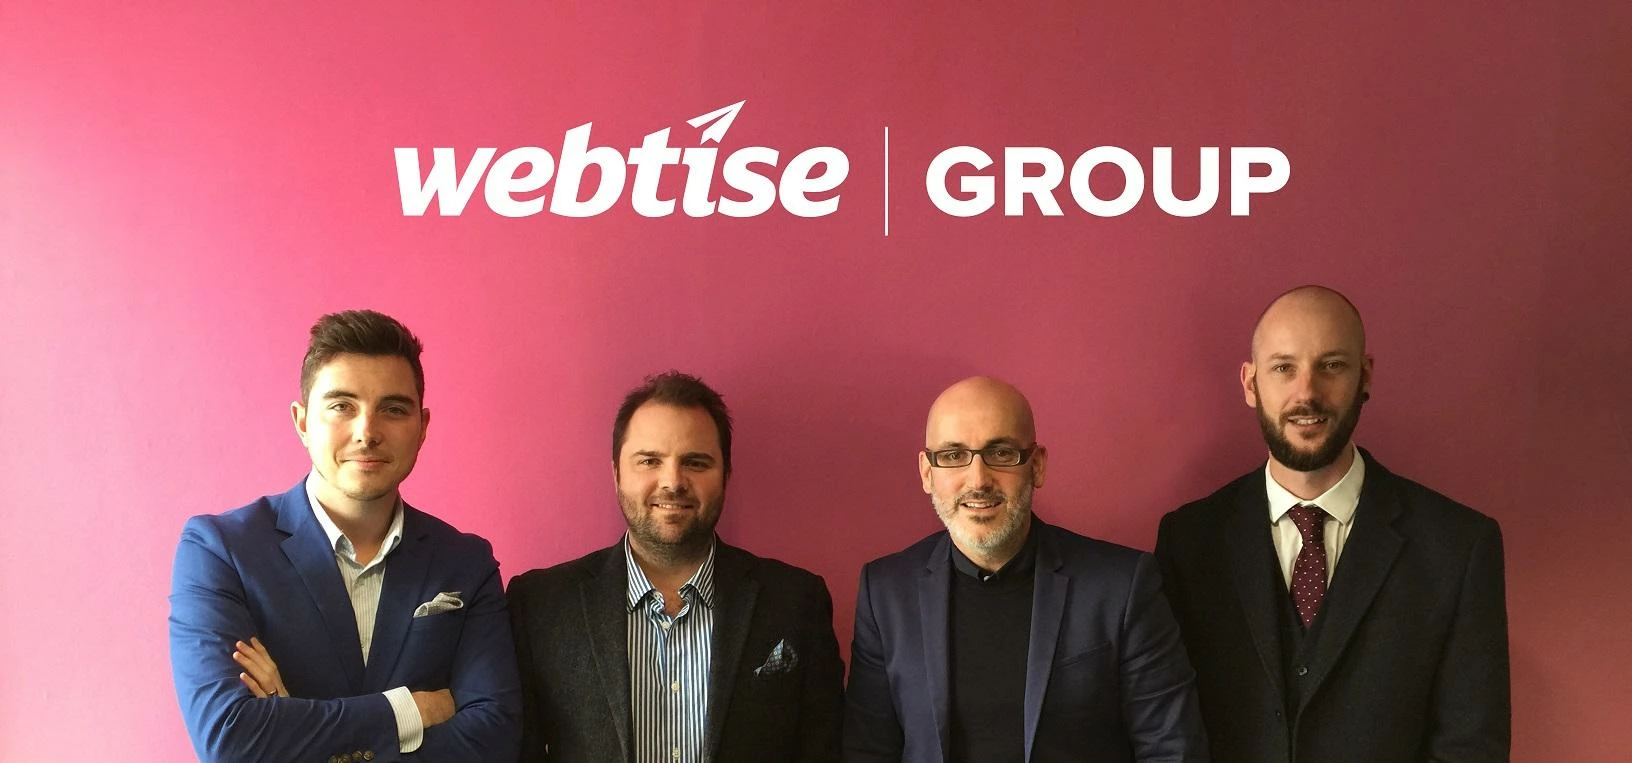 Webtise Group have acquired Apposing